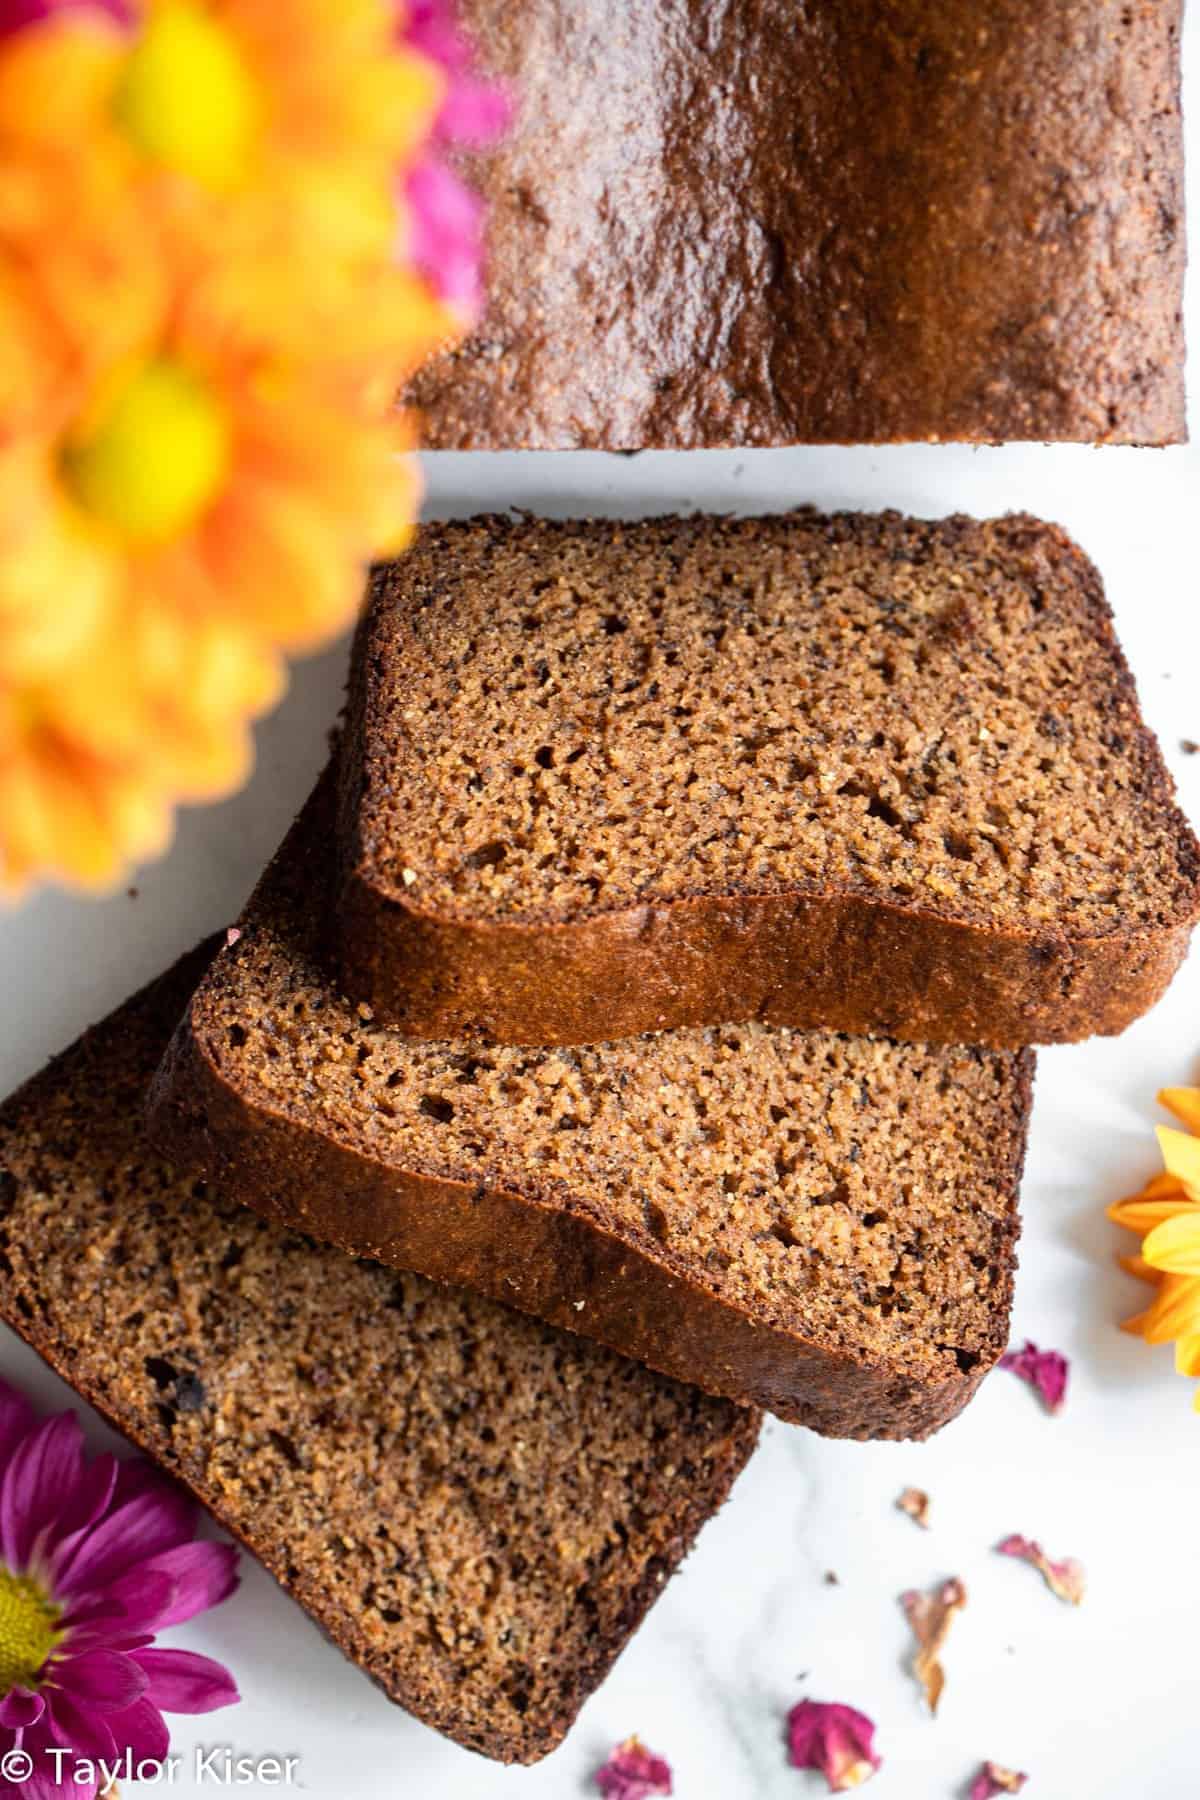 Slices of protein banana bread with flowers on a table